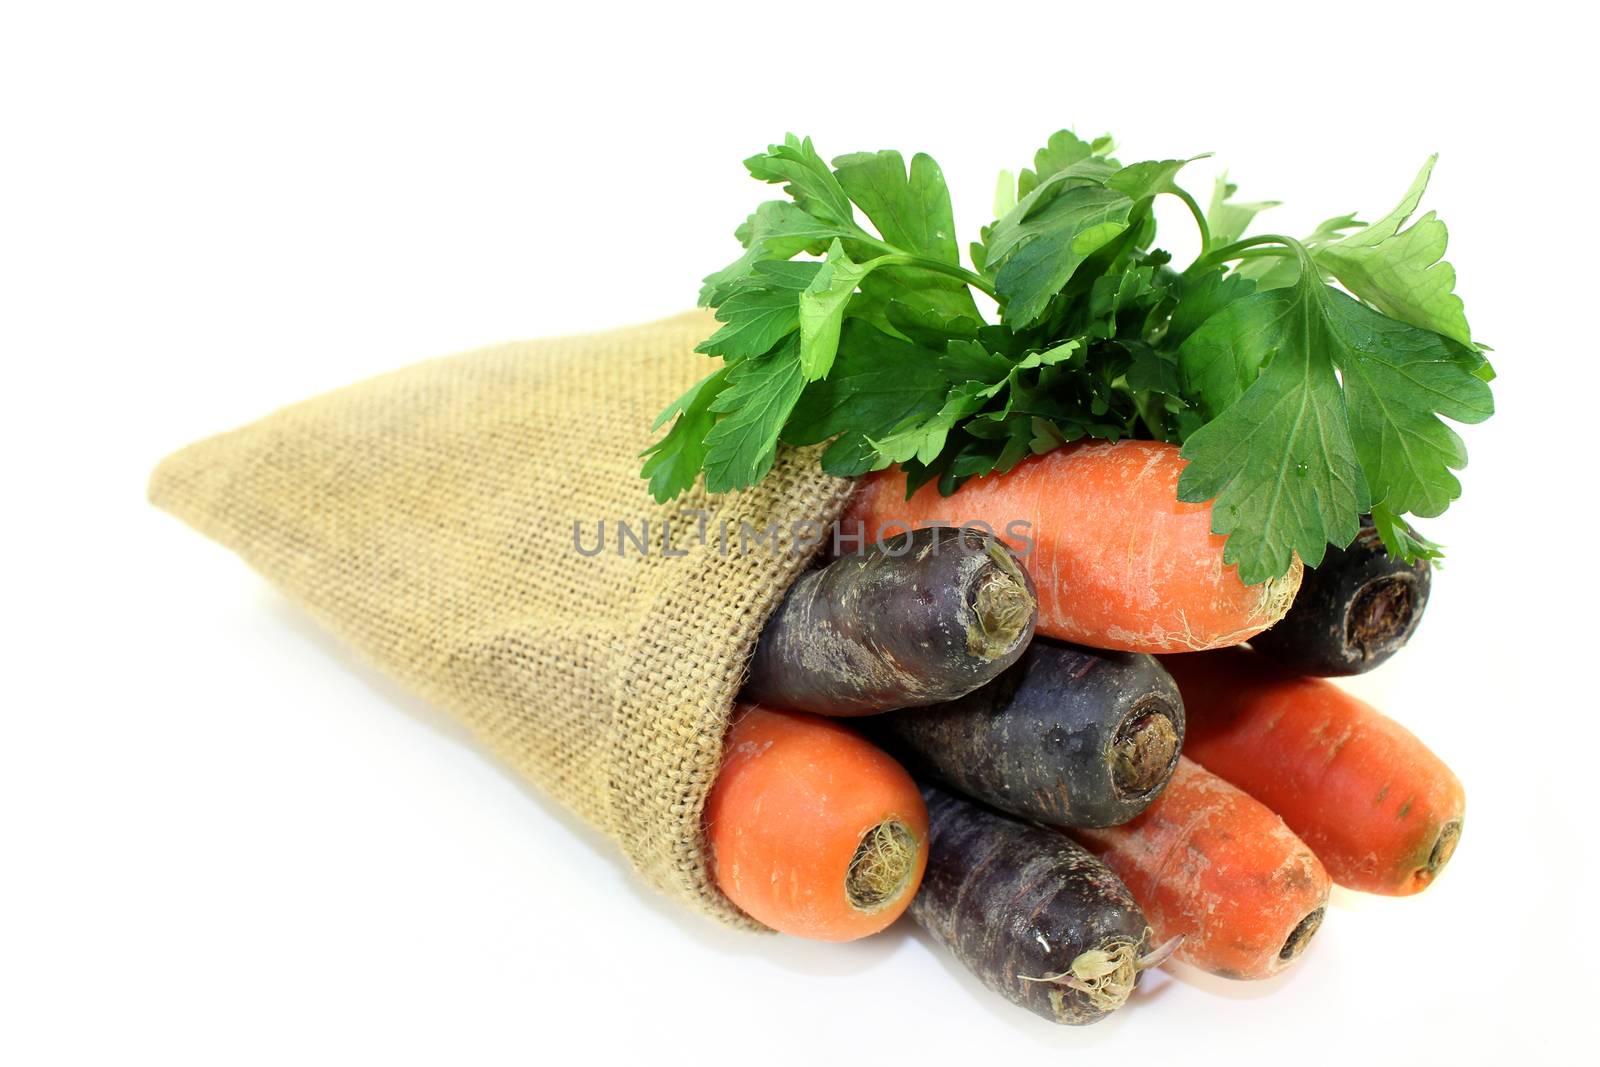 orange and purple carrots in a jute sack